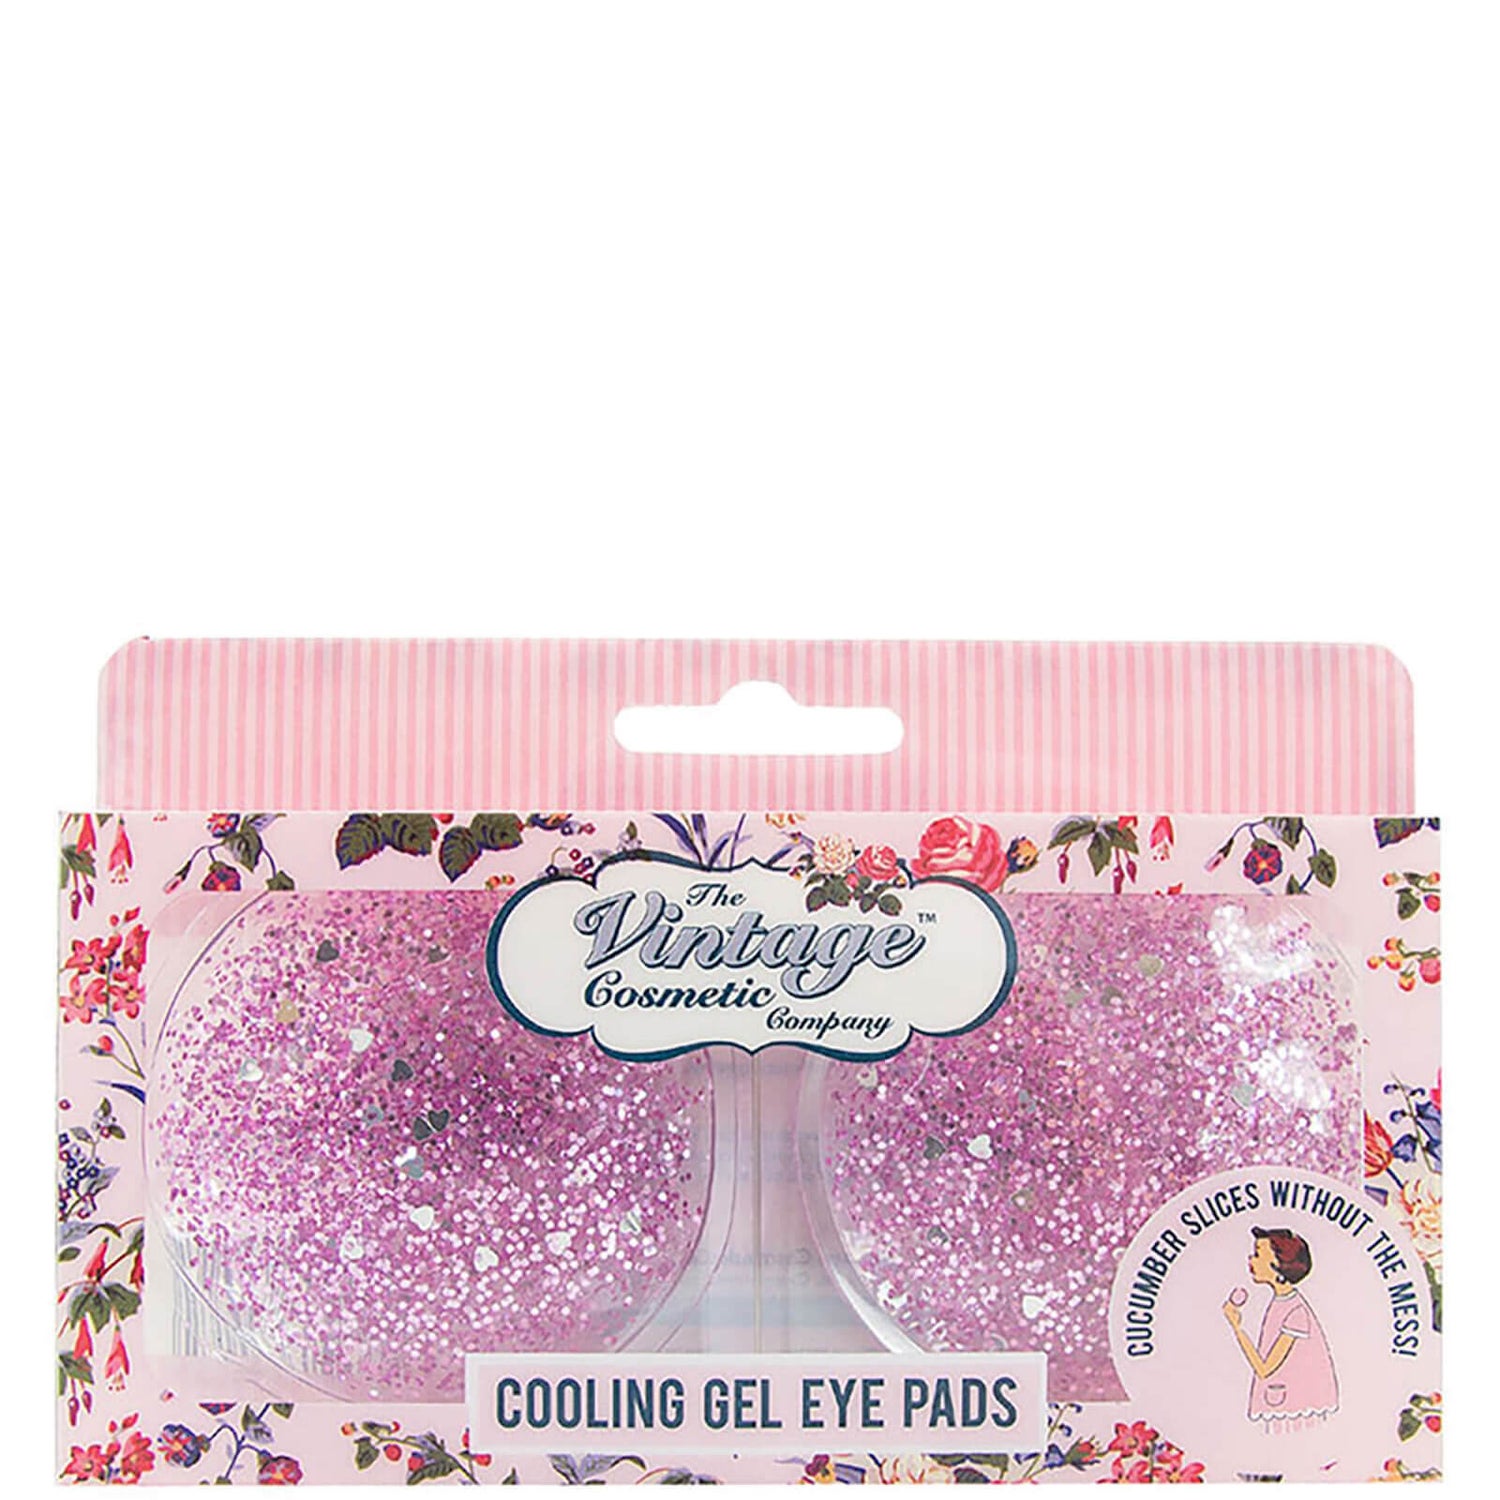 The Vintage Cosmetic Company Cooling Gel Eye Pads